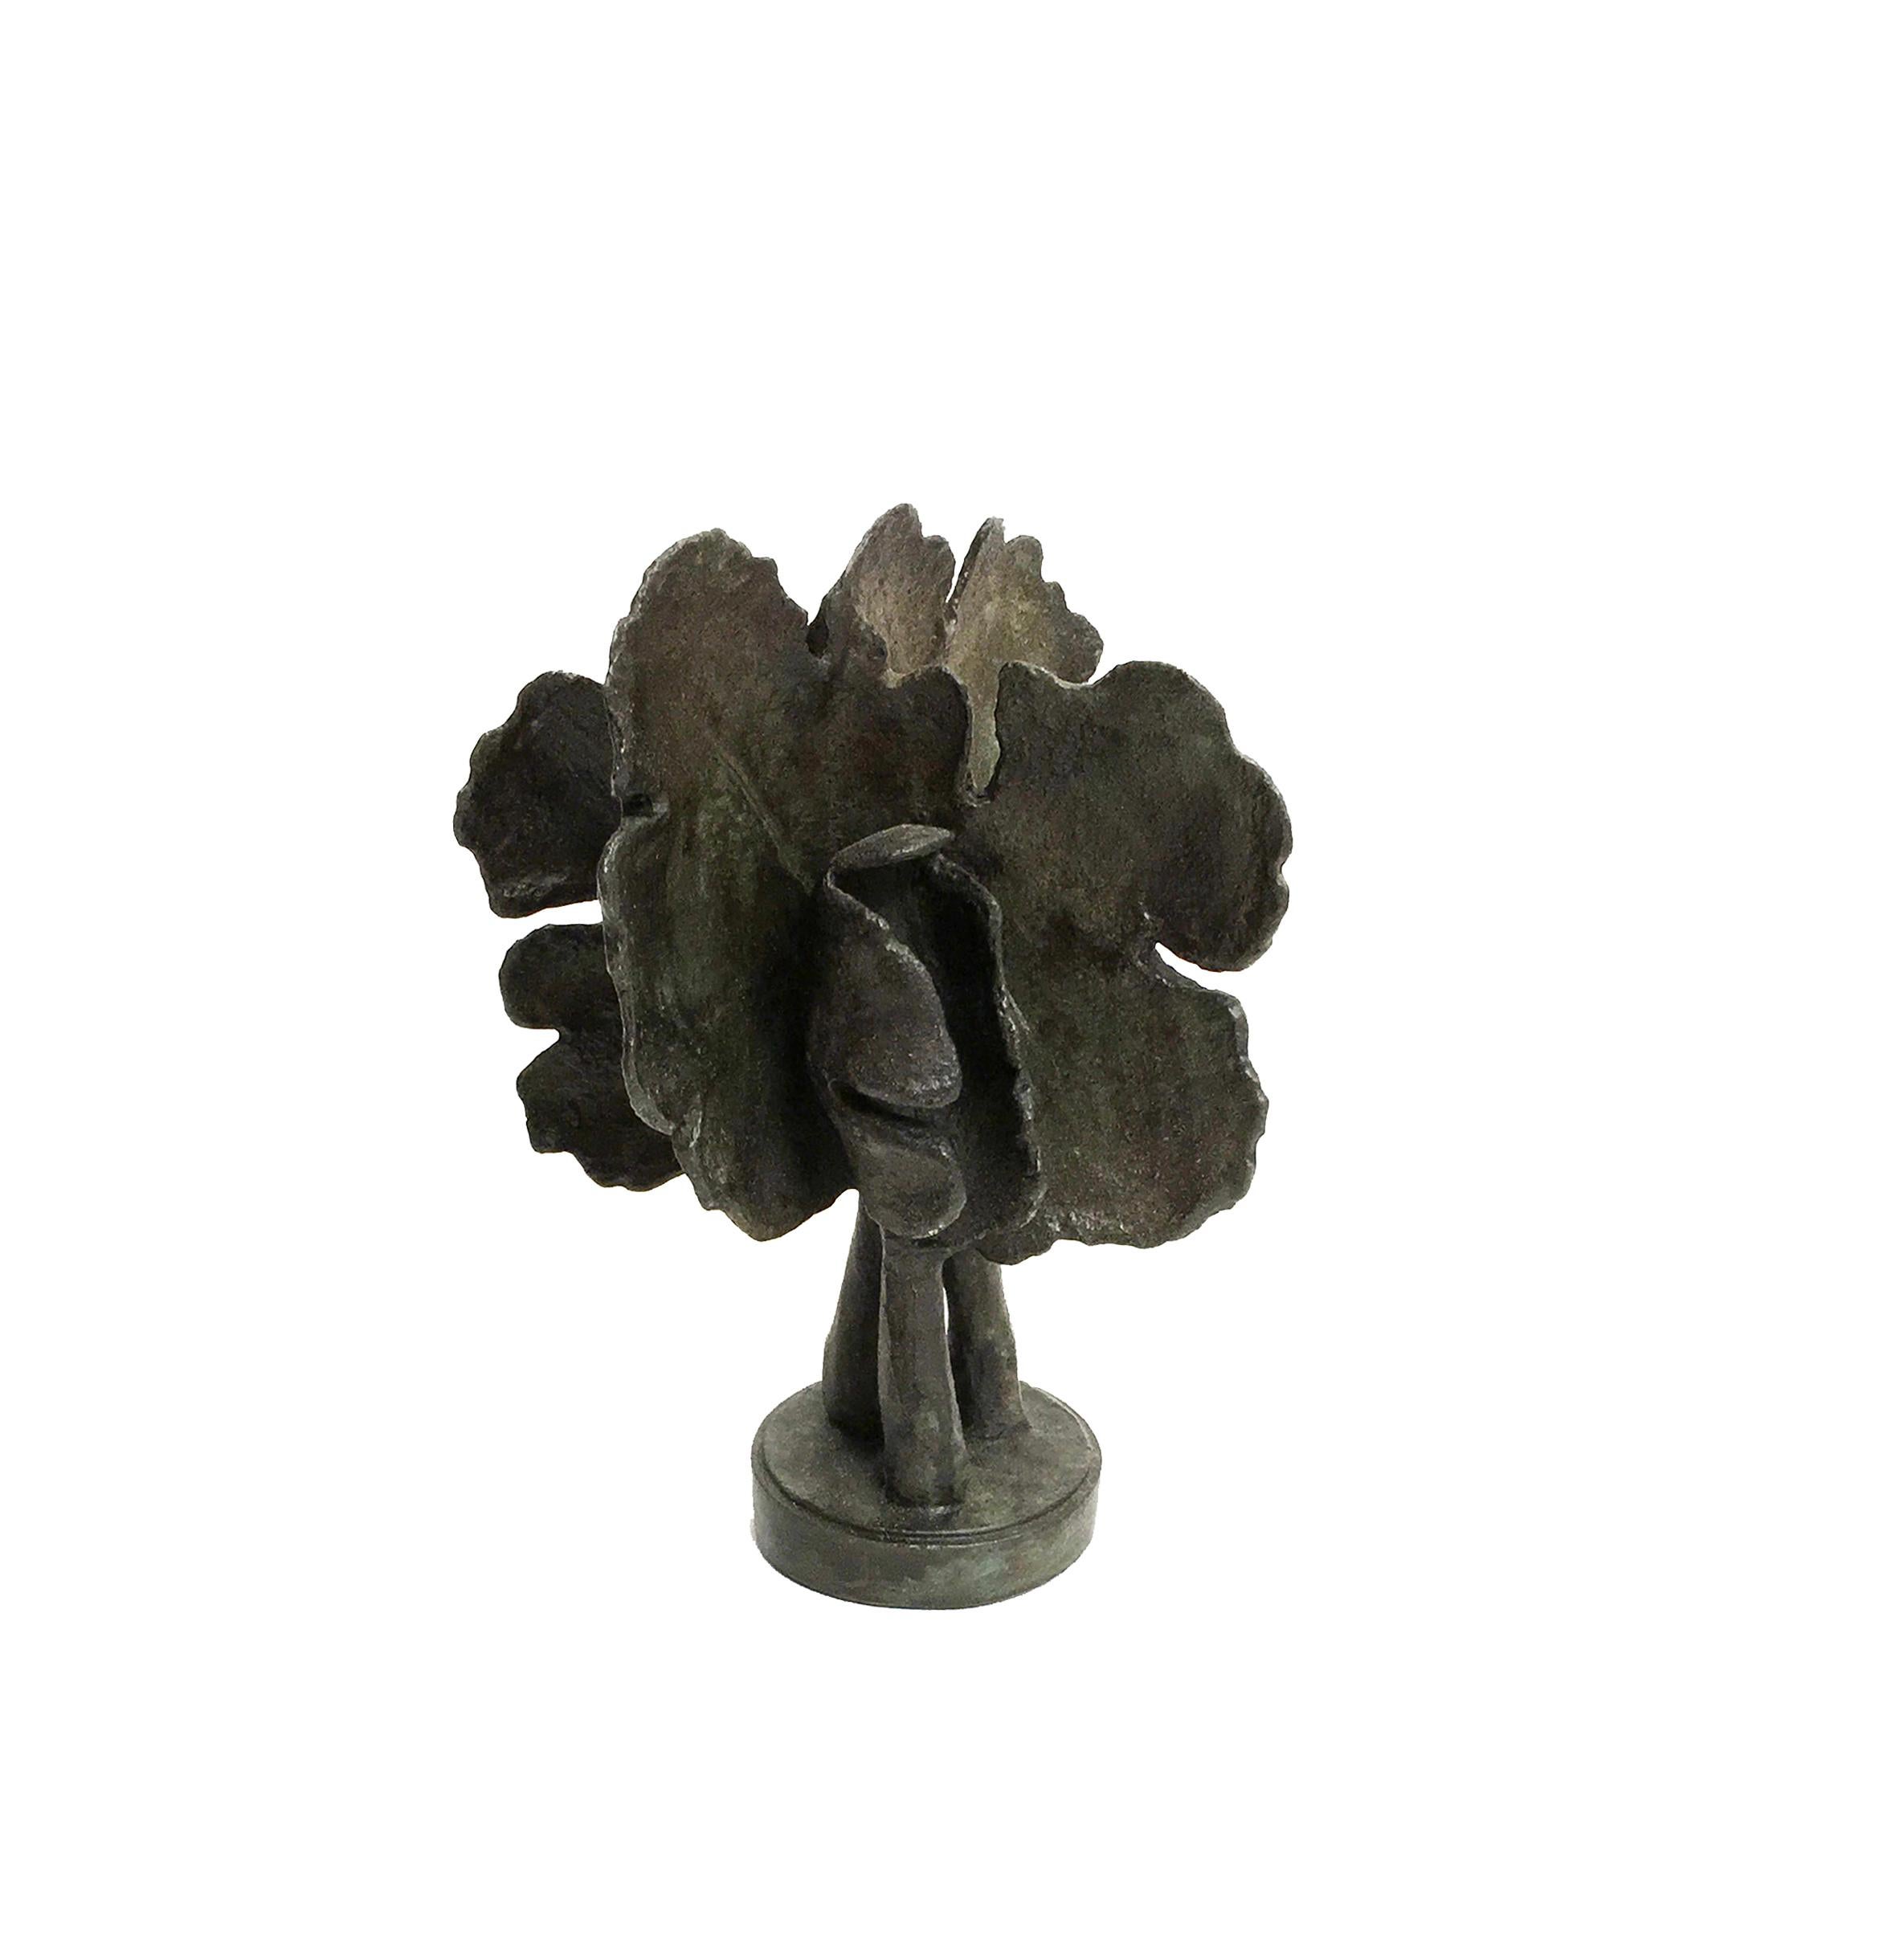 Organic Modern Bloodroot, Small Scale Cast Bronze Botanical Sculpture with Subtle Patina